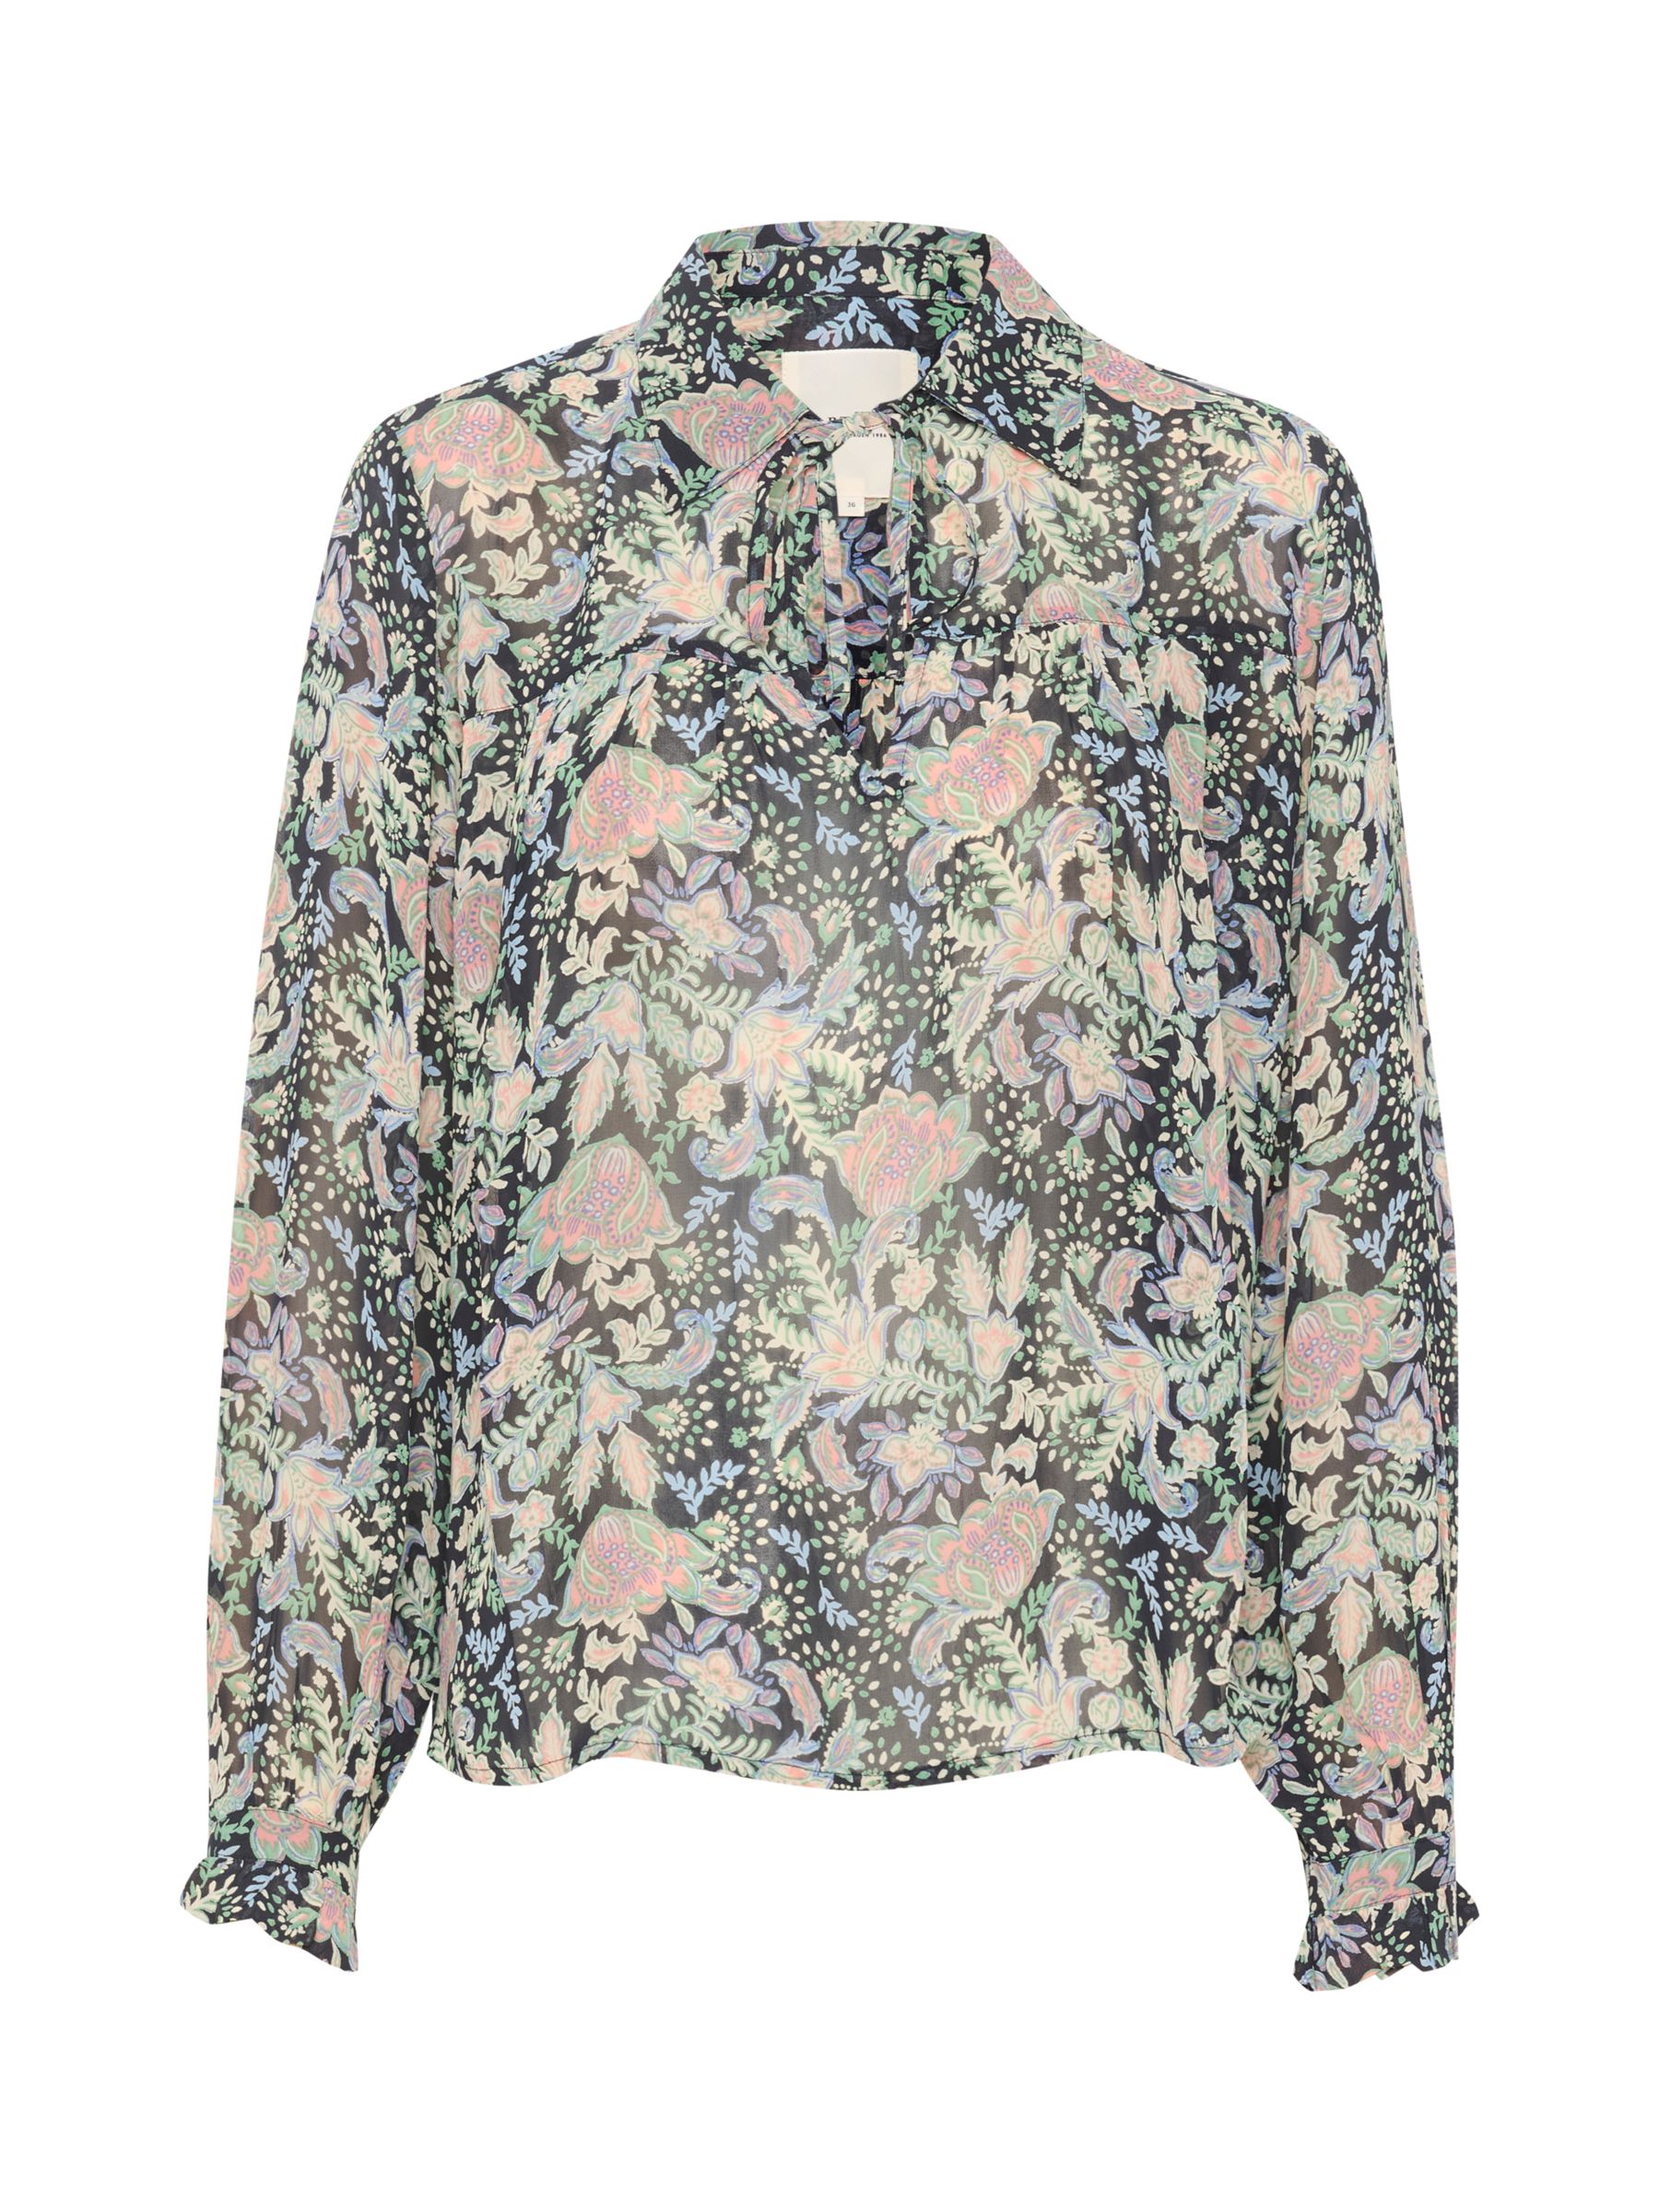 Buy Part Two Faya Floral Chiffon Blouse Online at johnlewis.com